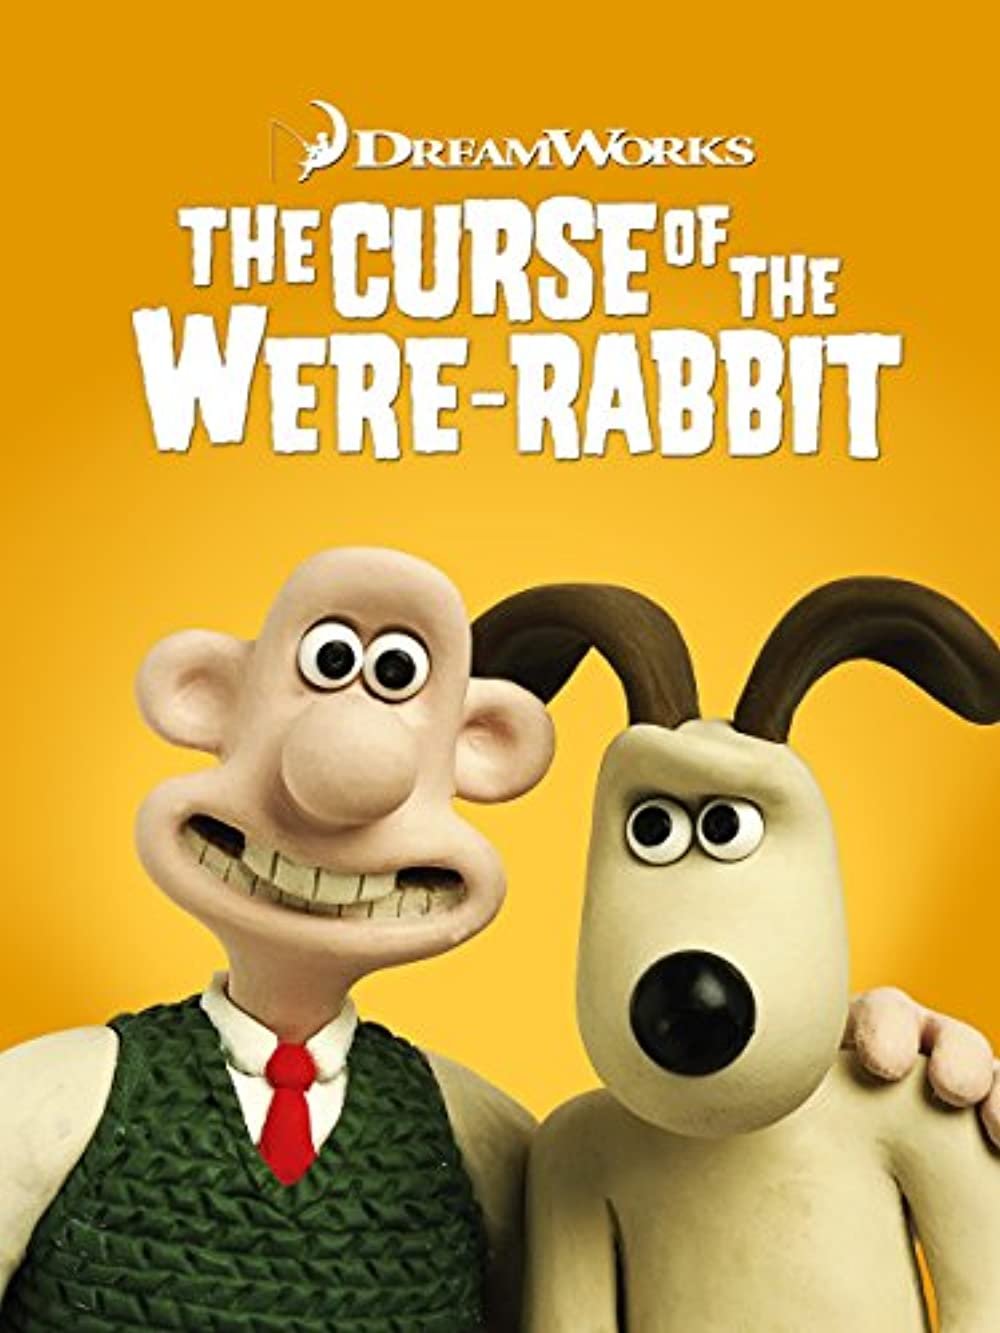 10. Wallace And Gromit In The Curse Of The Were-Rabbit (2005)